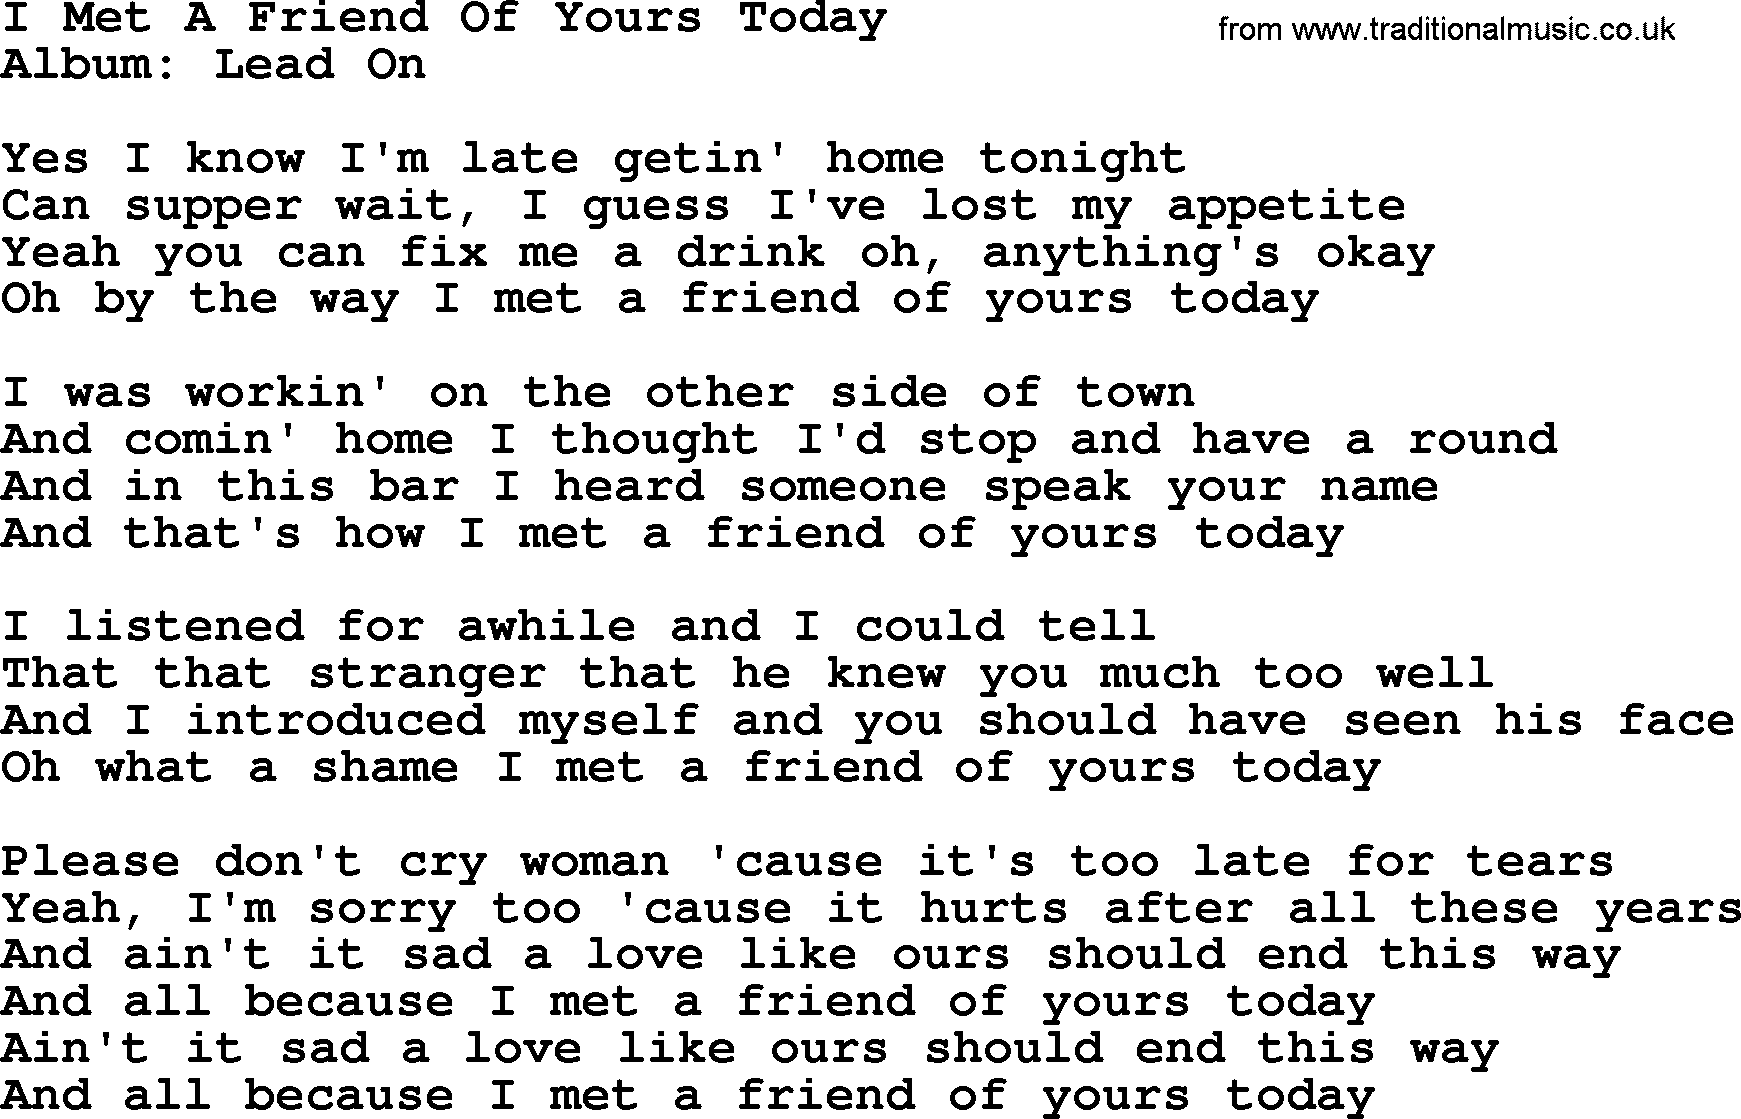 George Strait song: I Met A Friend Of Yours Today, lyrics